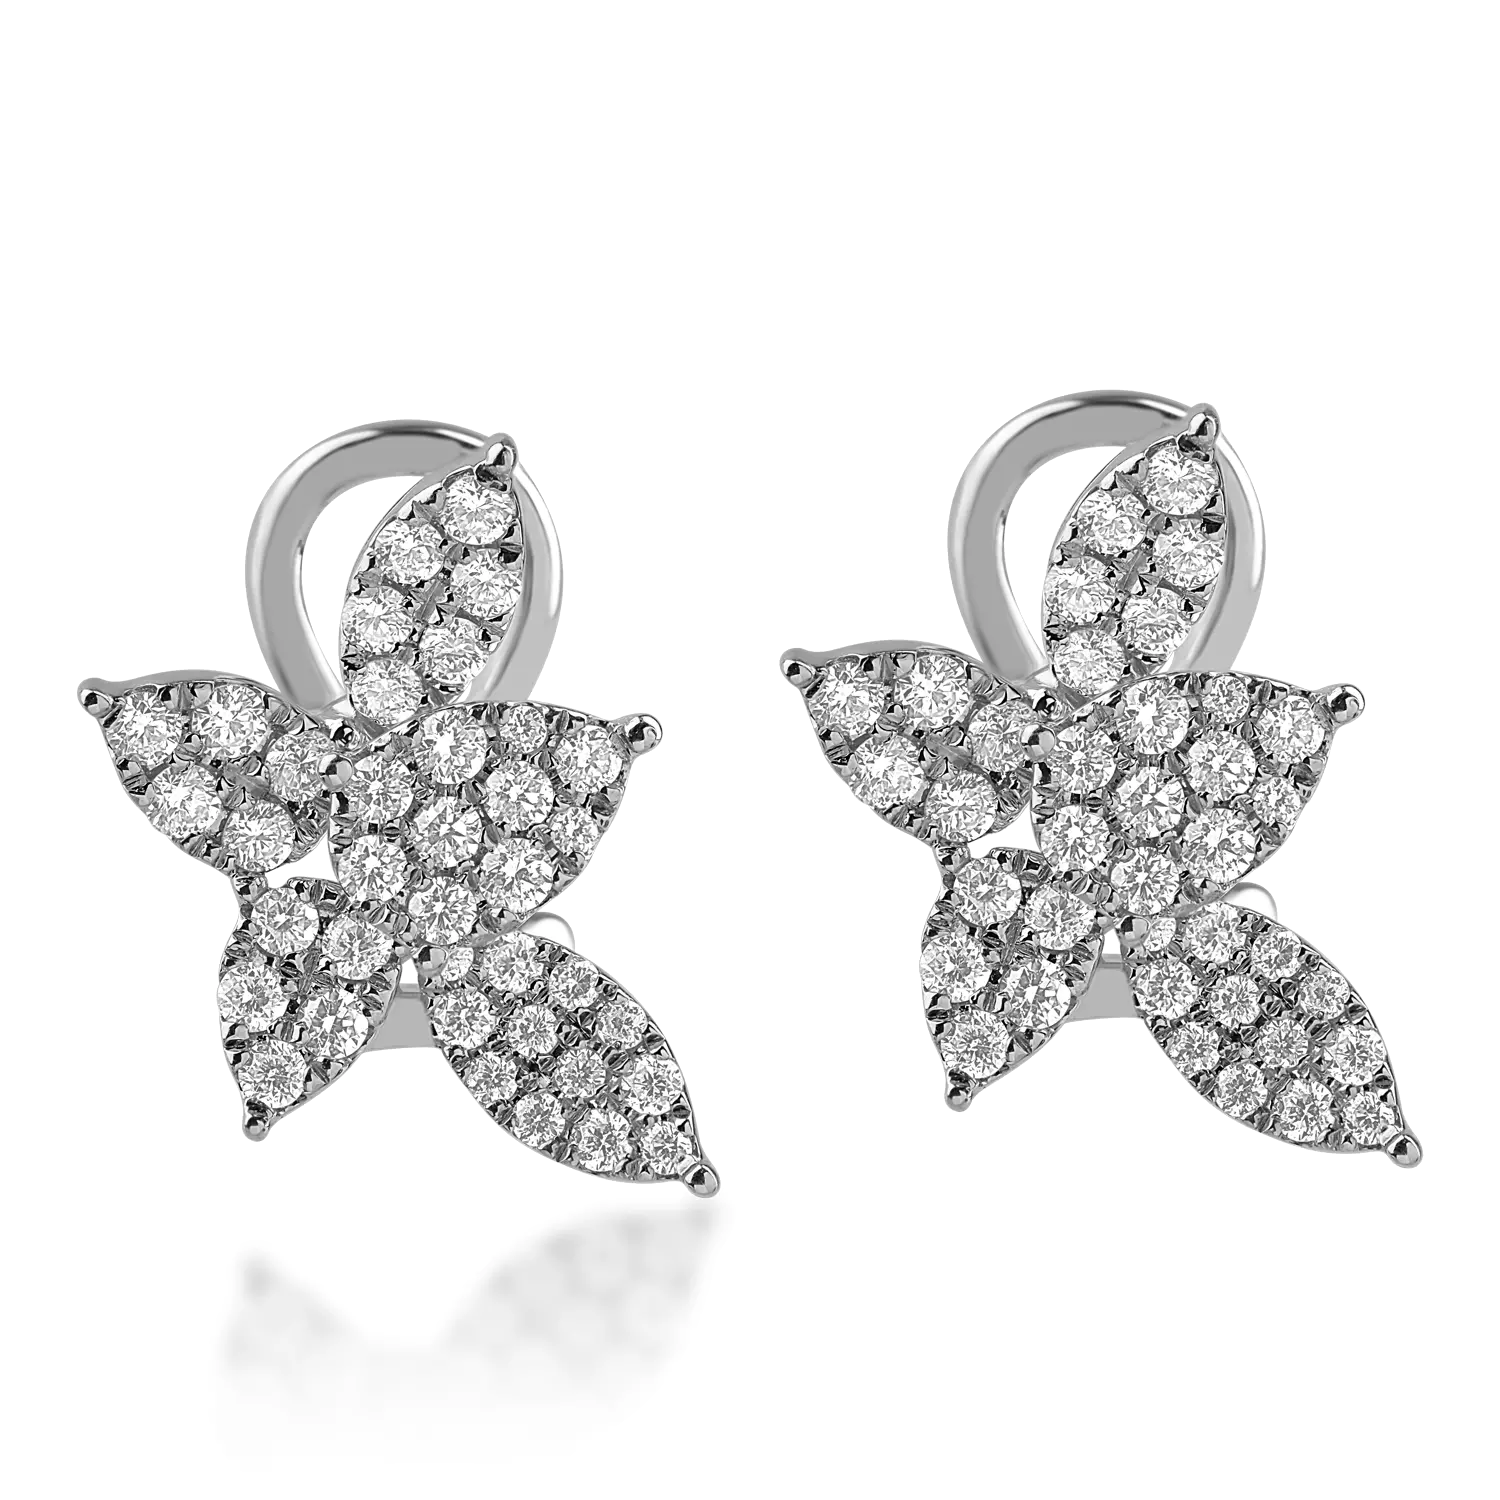 White gold flower earrings with 0.73ct diamonds